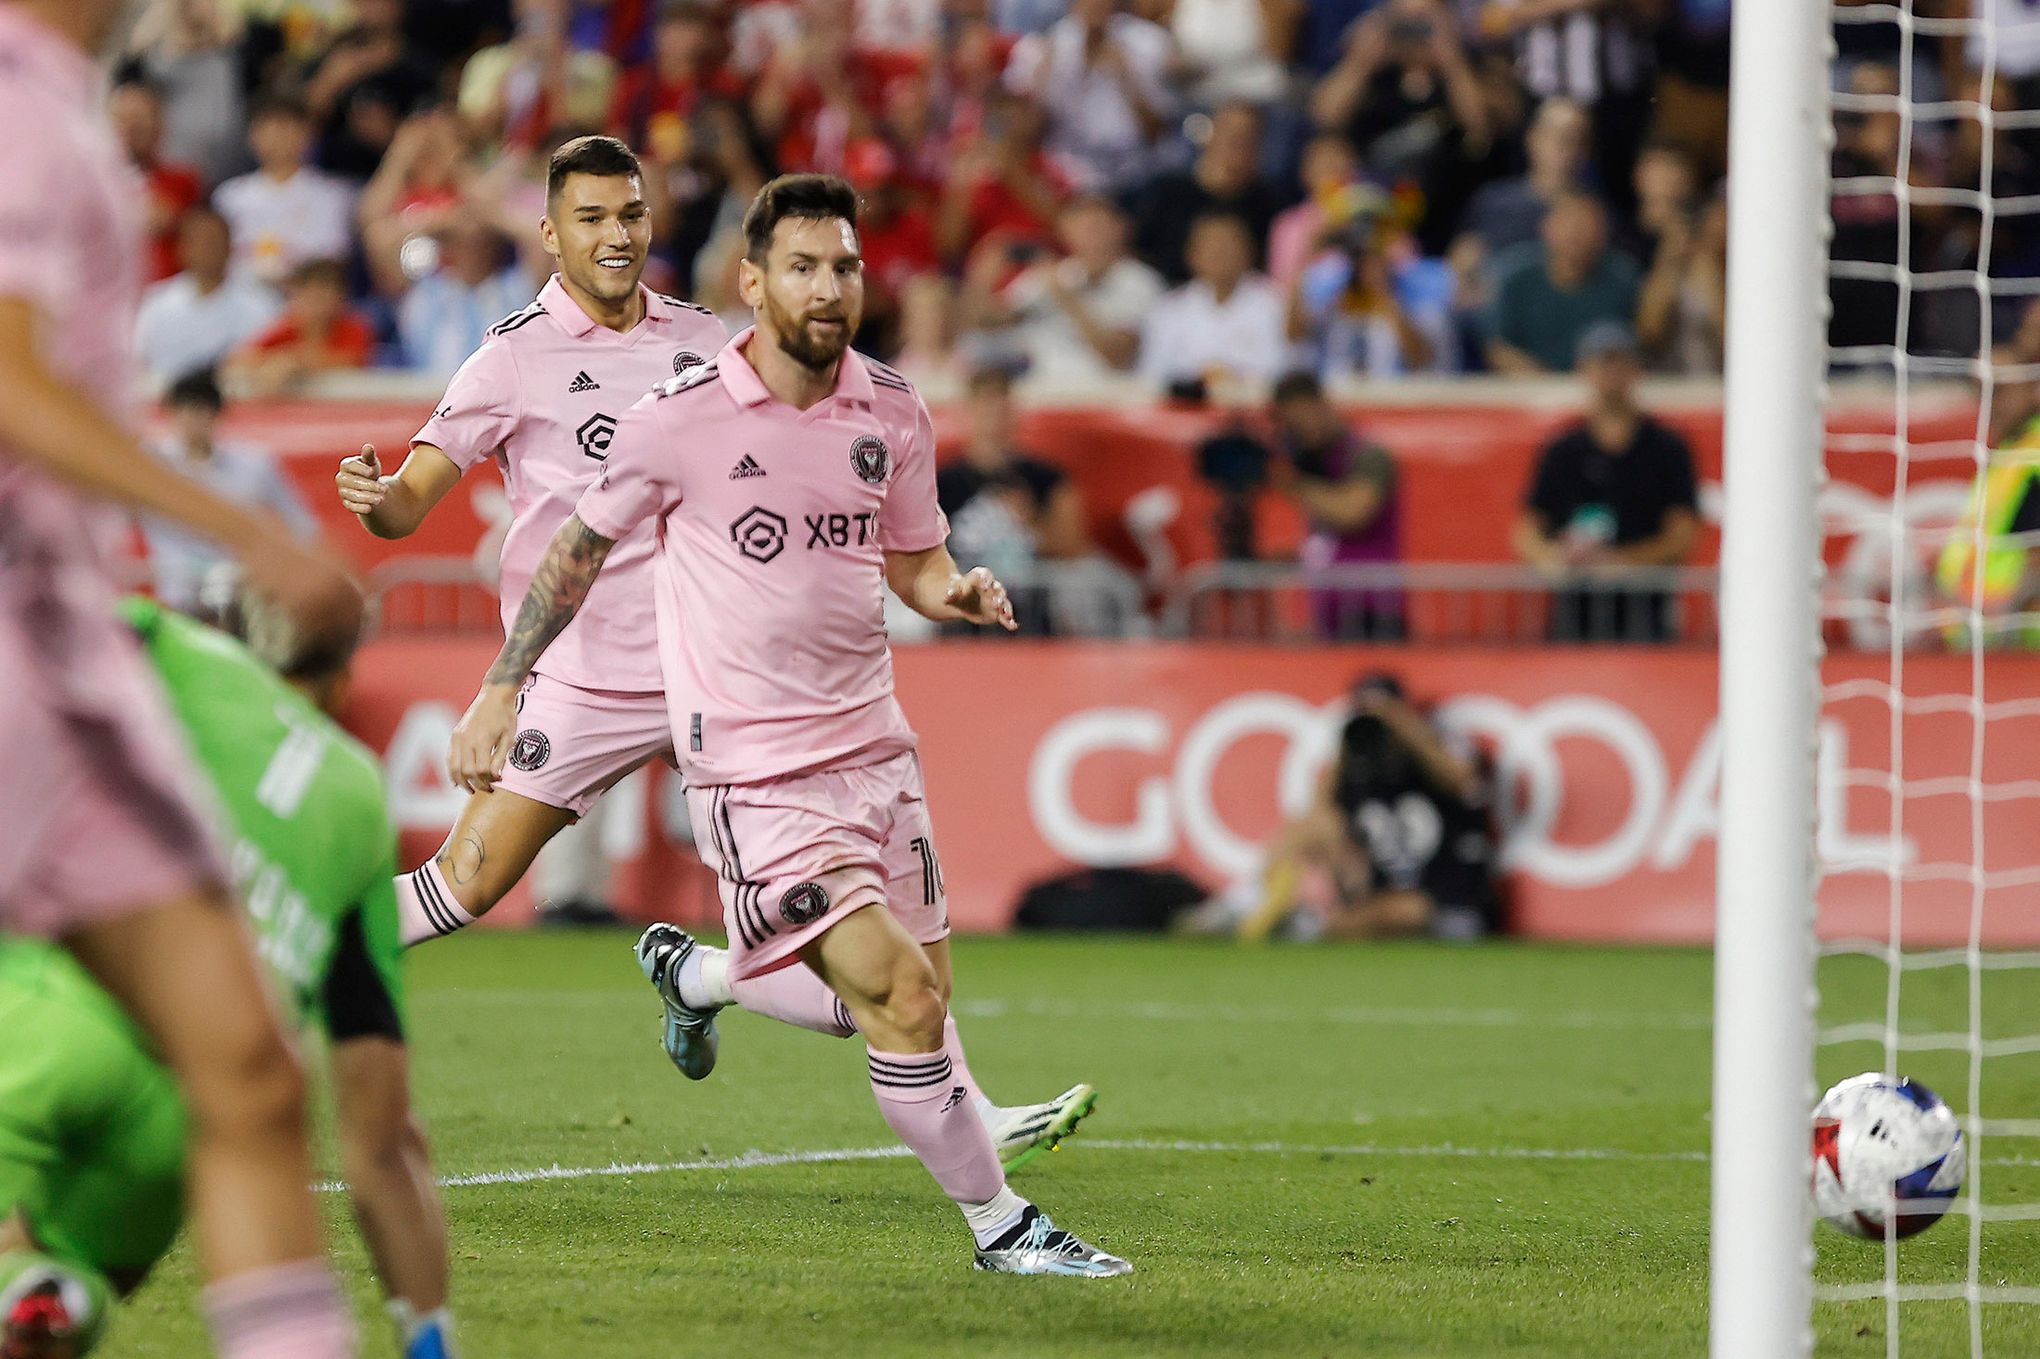 Lionel Messi boosts MLS, but soccer league needs more